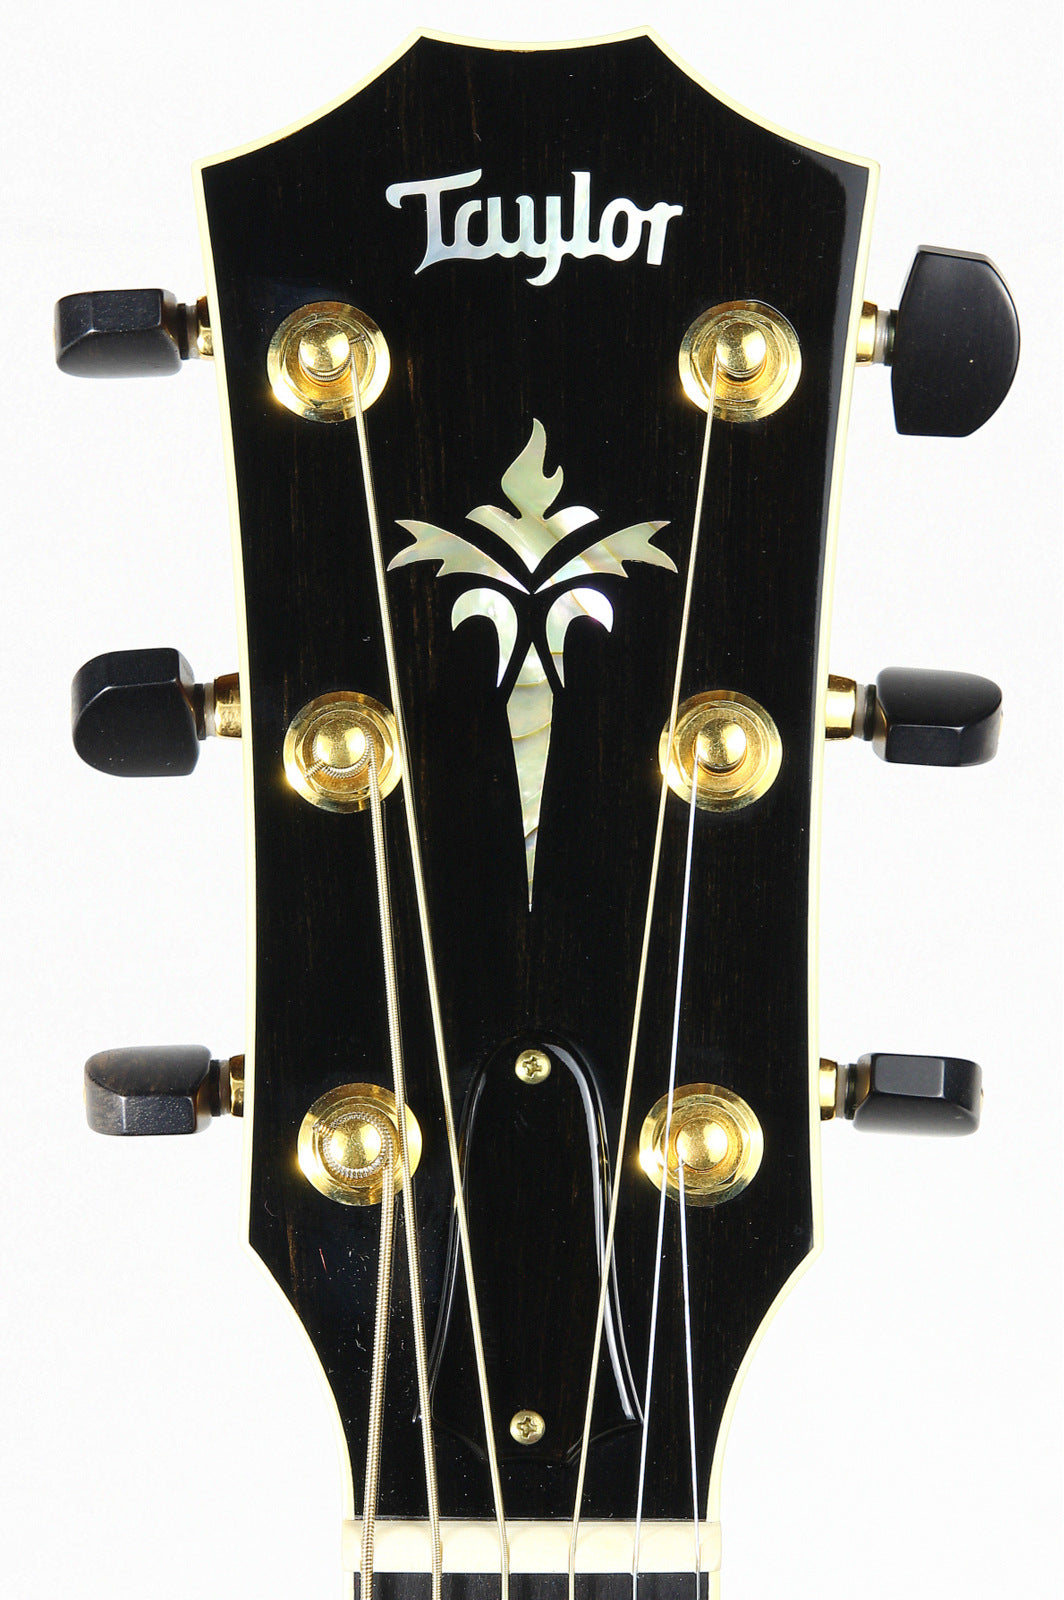 Taylor headstock with brand logo